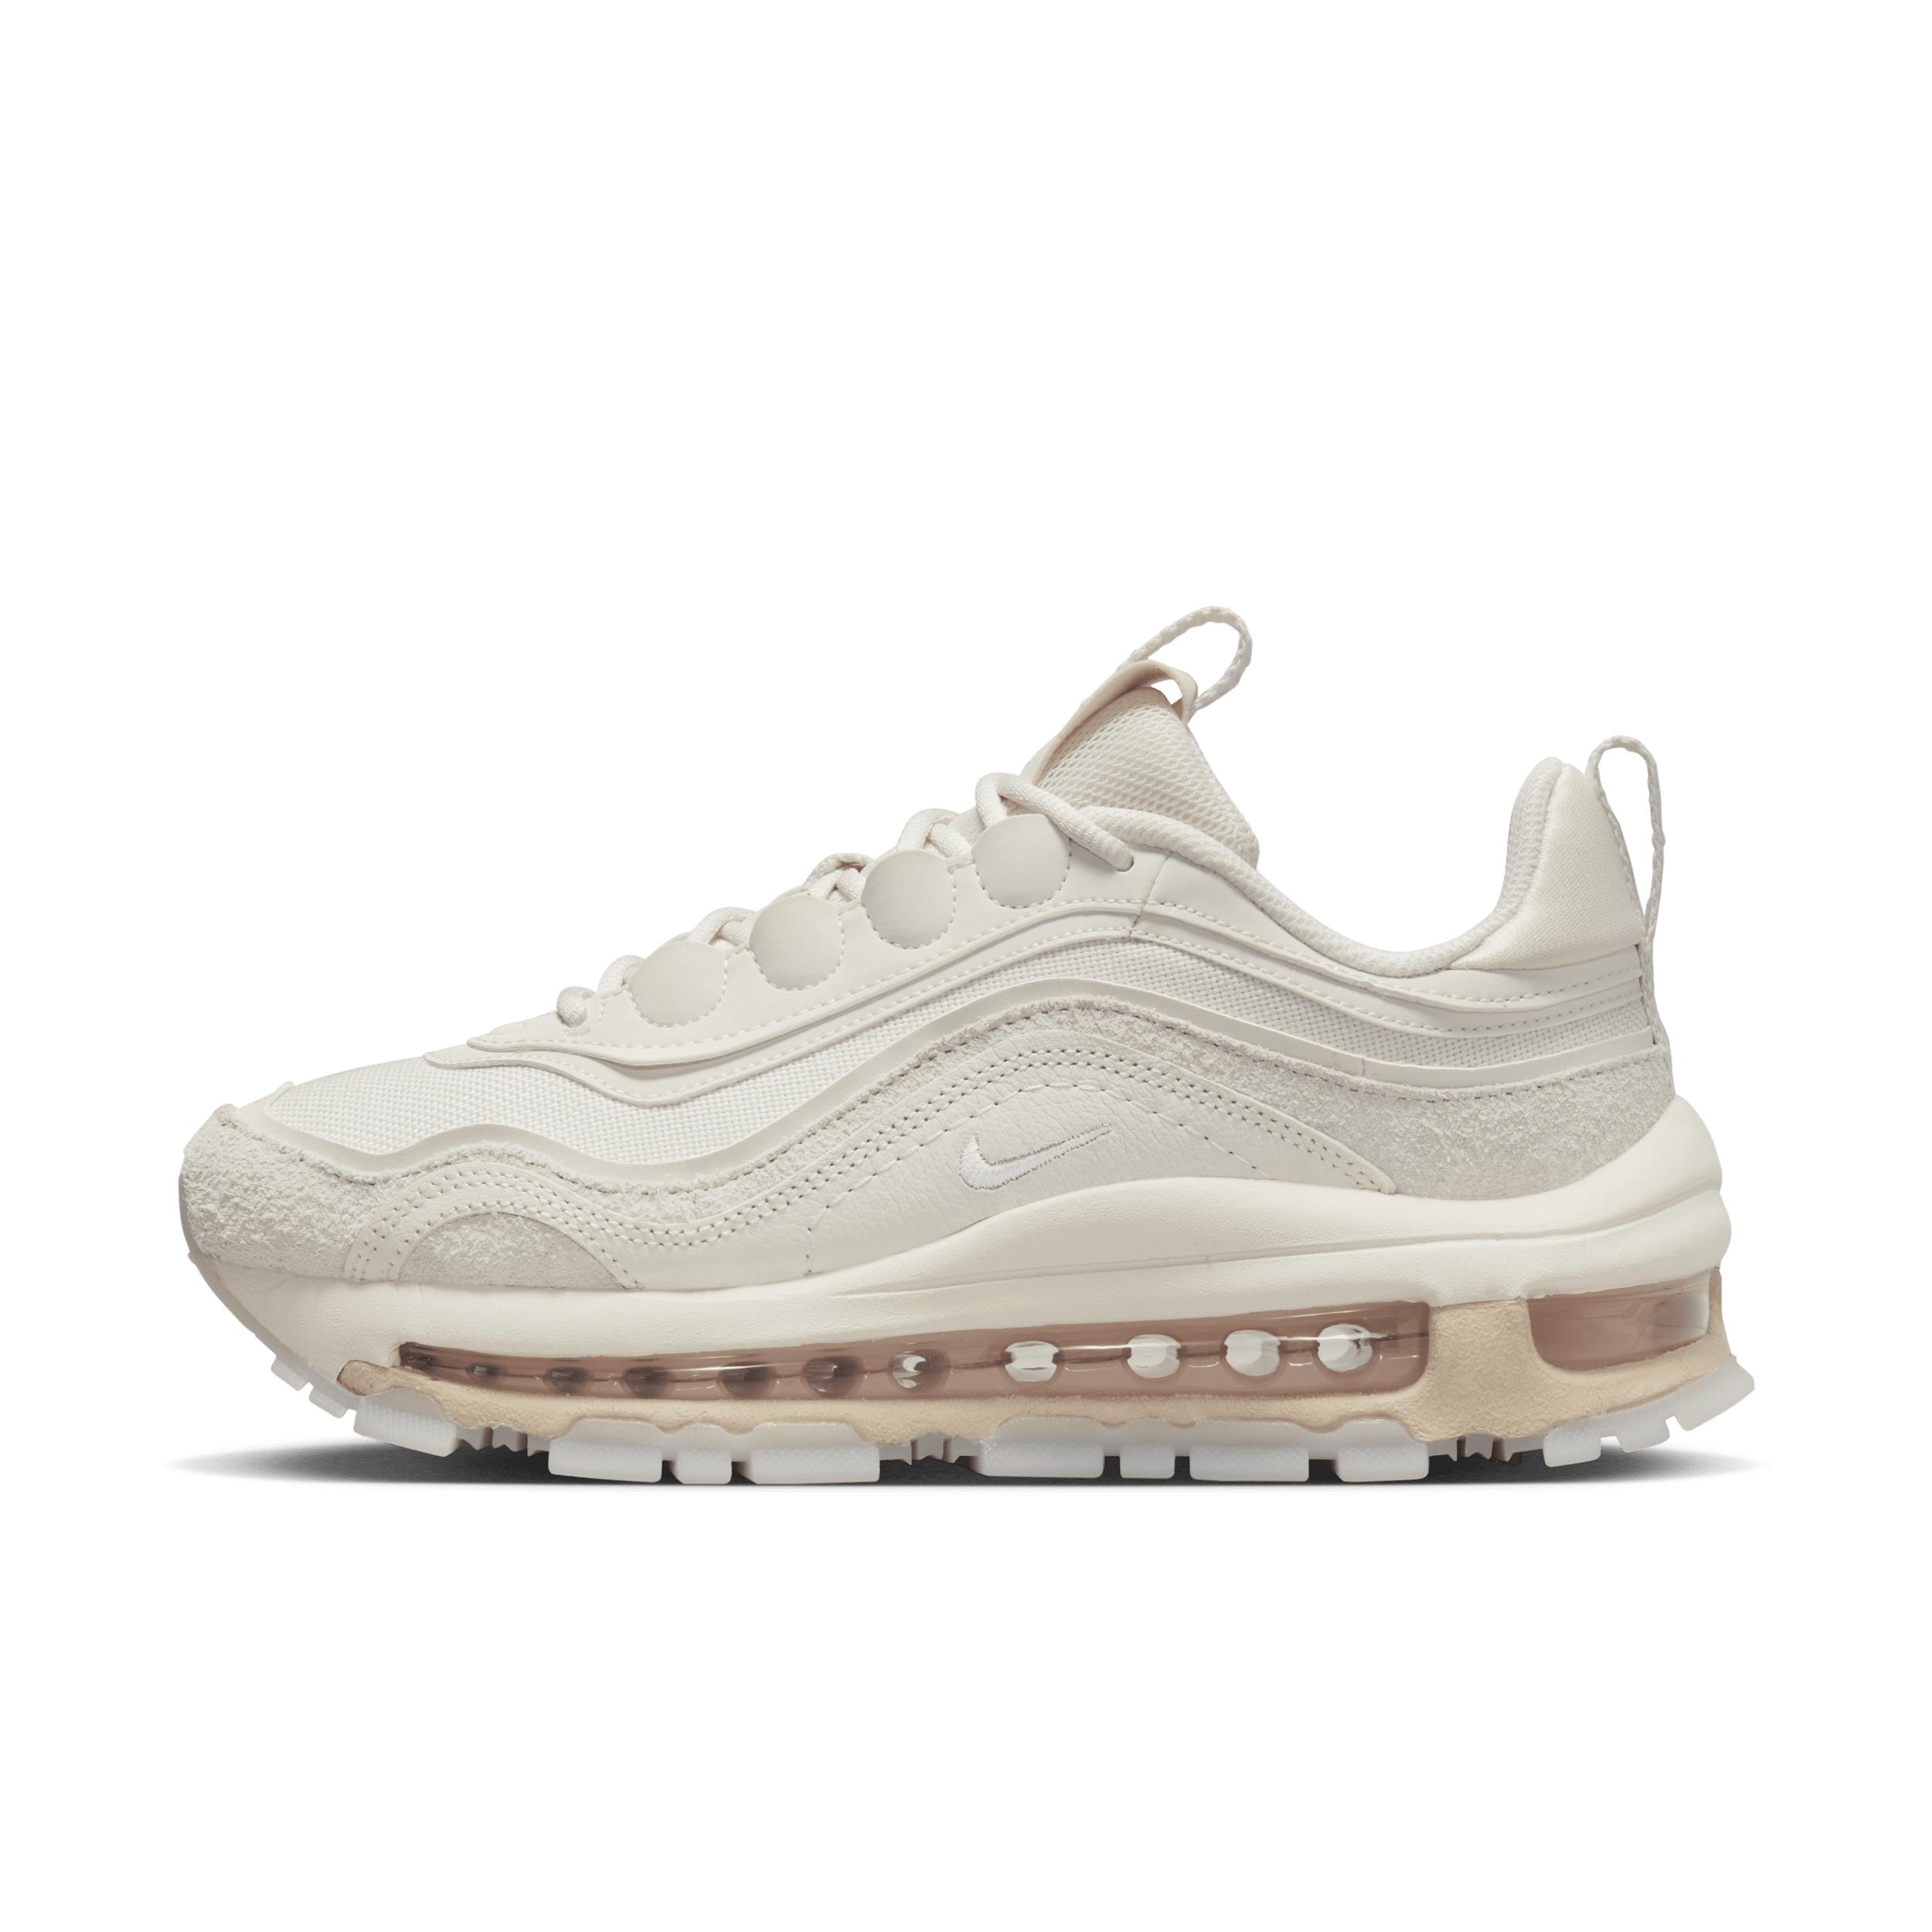 Nike Air Max 97 Futura Shoes in White | Lyst UK